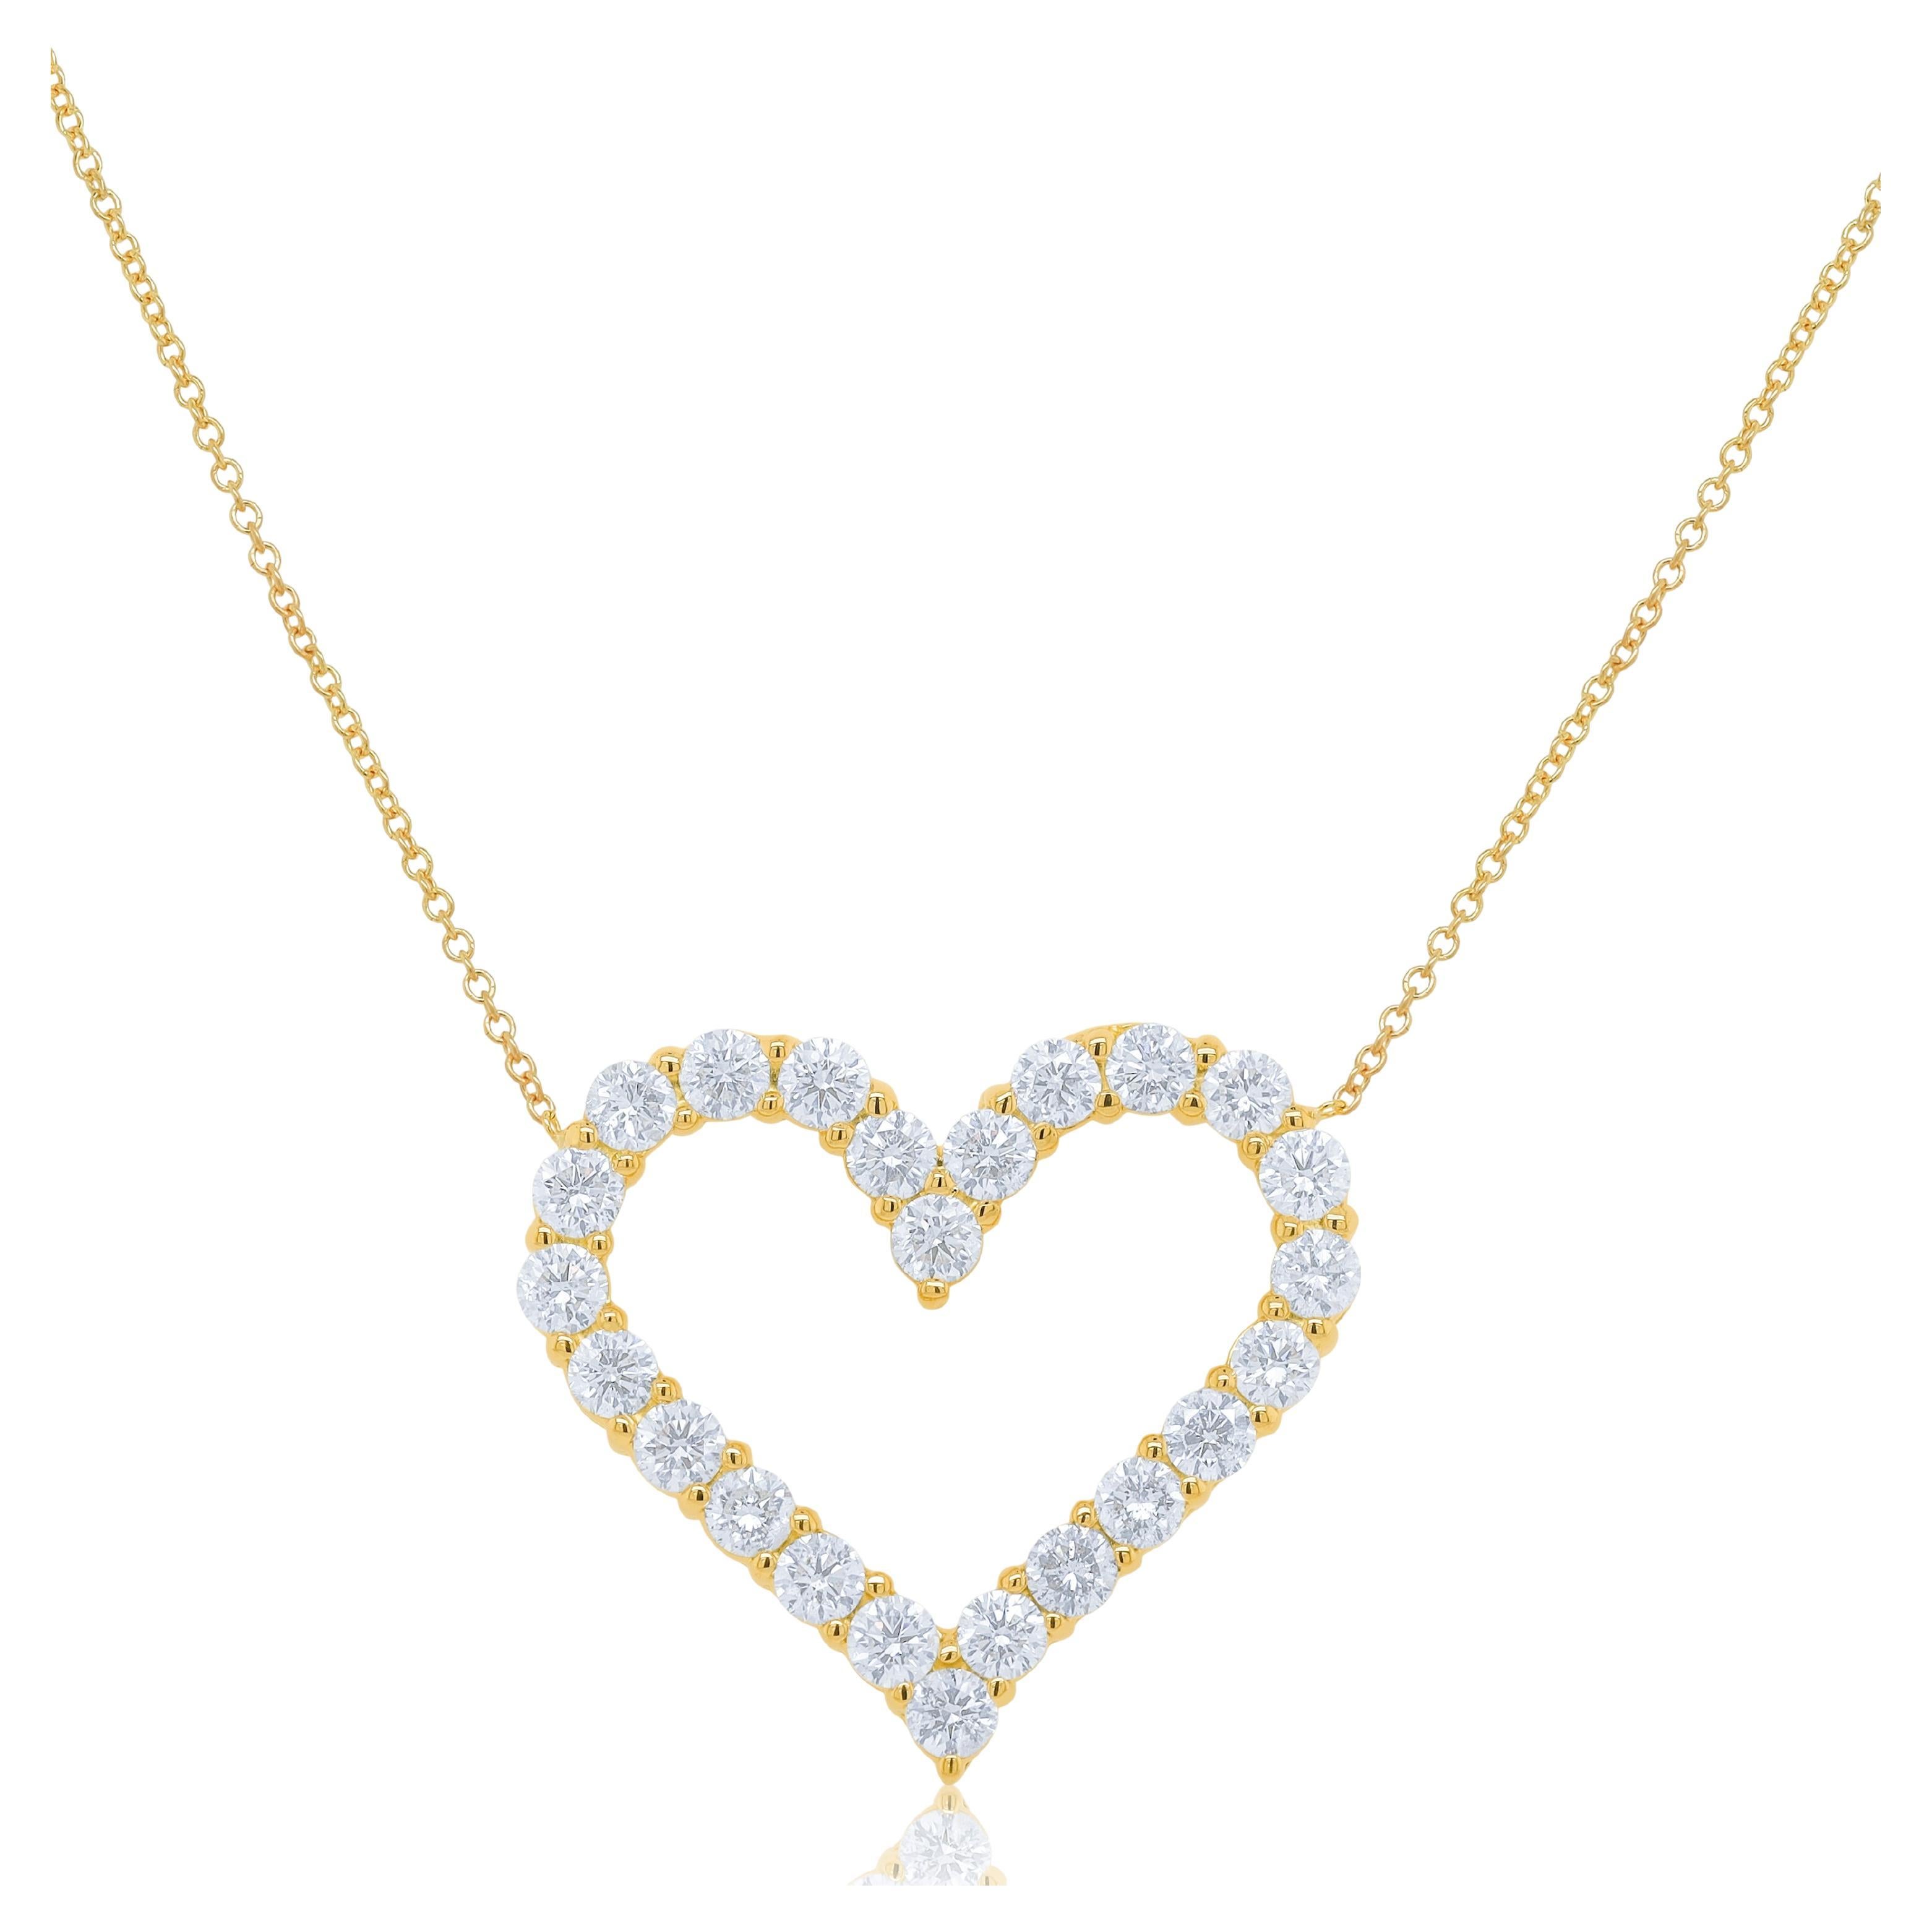 Diana M. 18kt yellow gold open heart pendant featuring 2.50 cts of round diamond For Sale